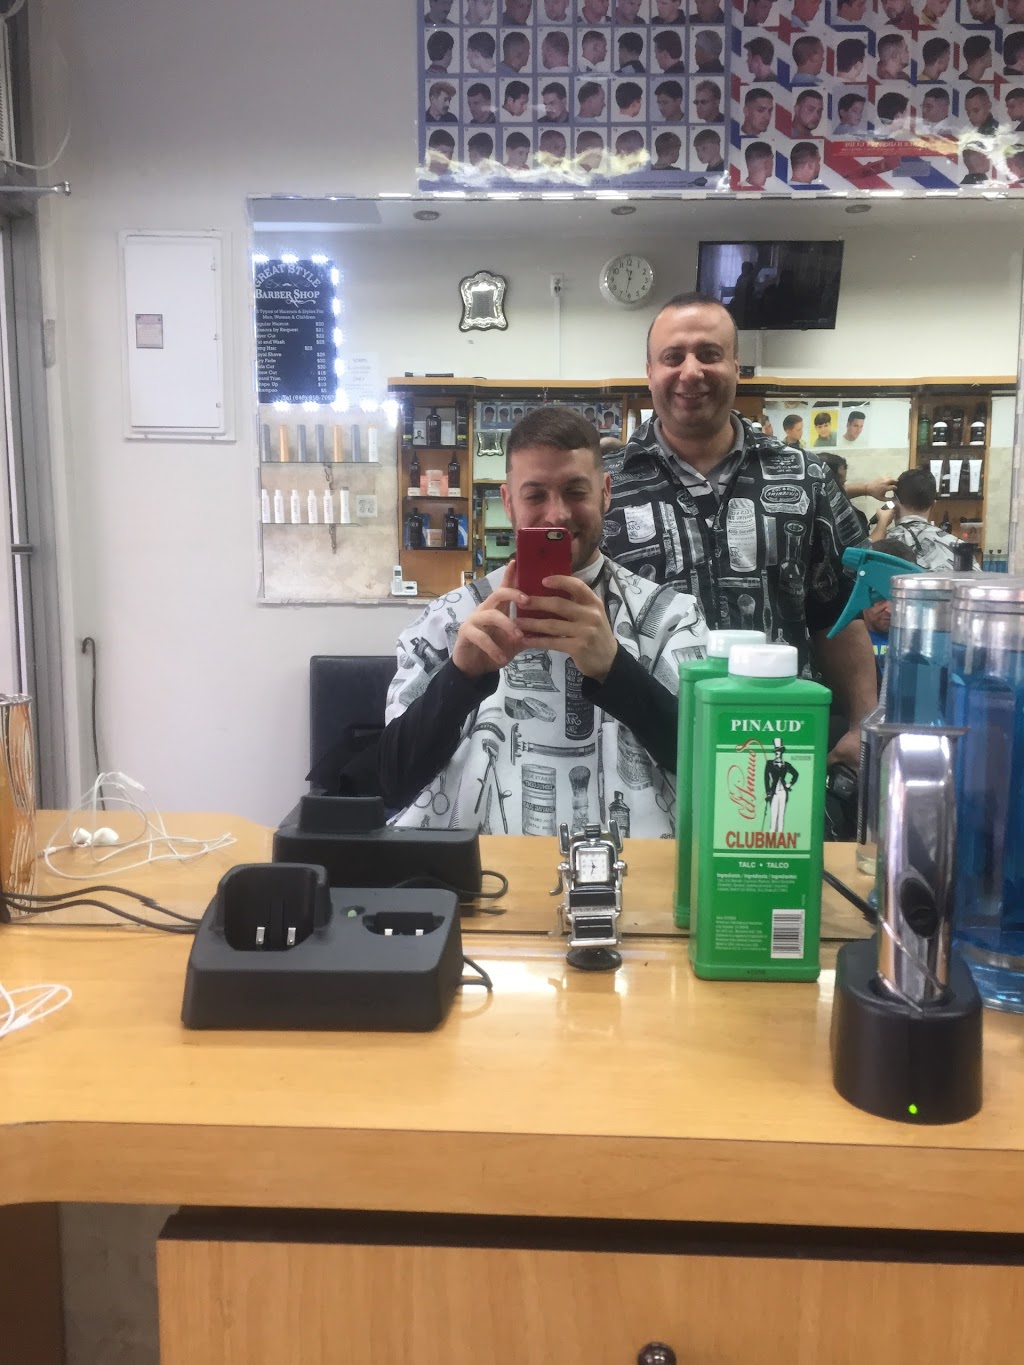 Great Style Barber Shop | 1734 2nd Ave, New York, NY 10128 | Phone: (646) 918-7083